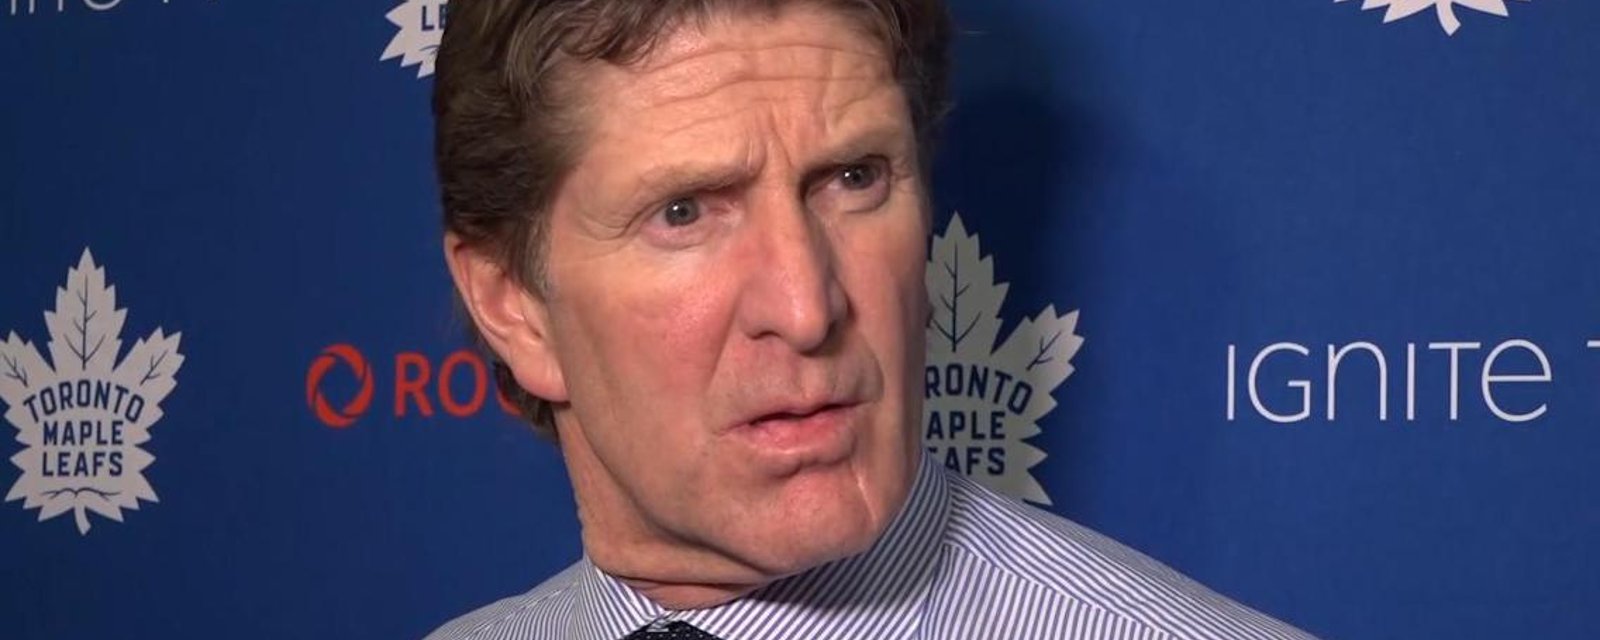 Maple Leafs caught taking Mike Babcock’s approach! 